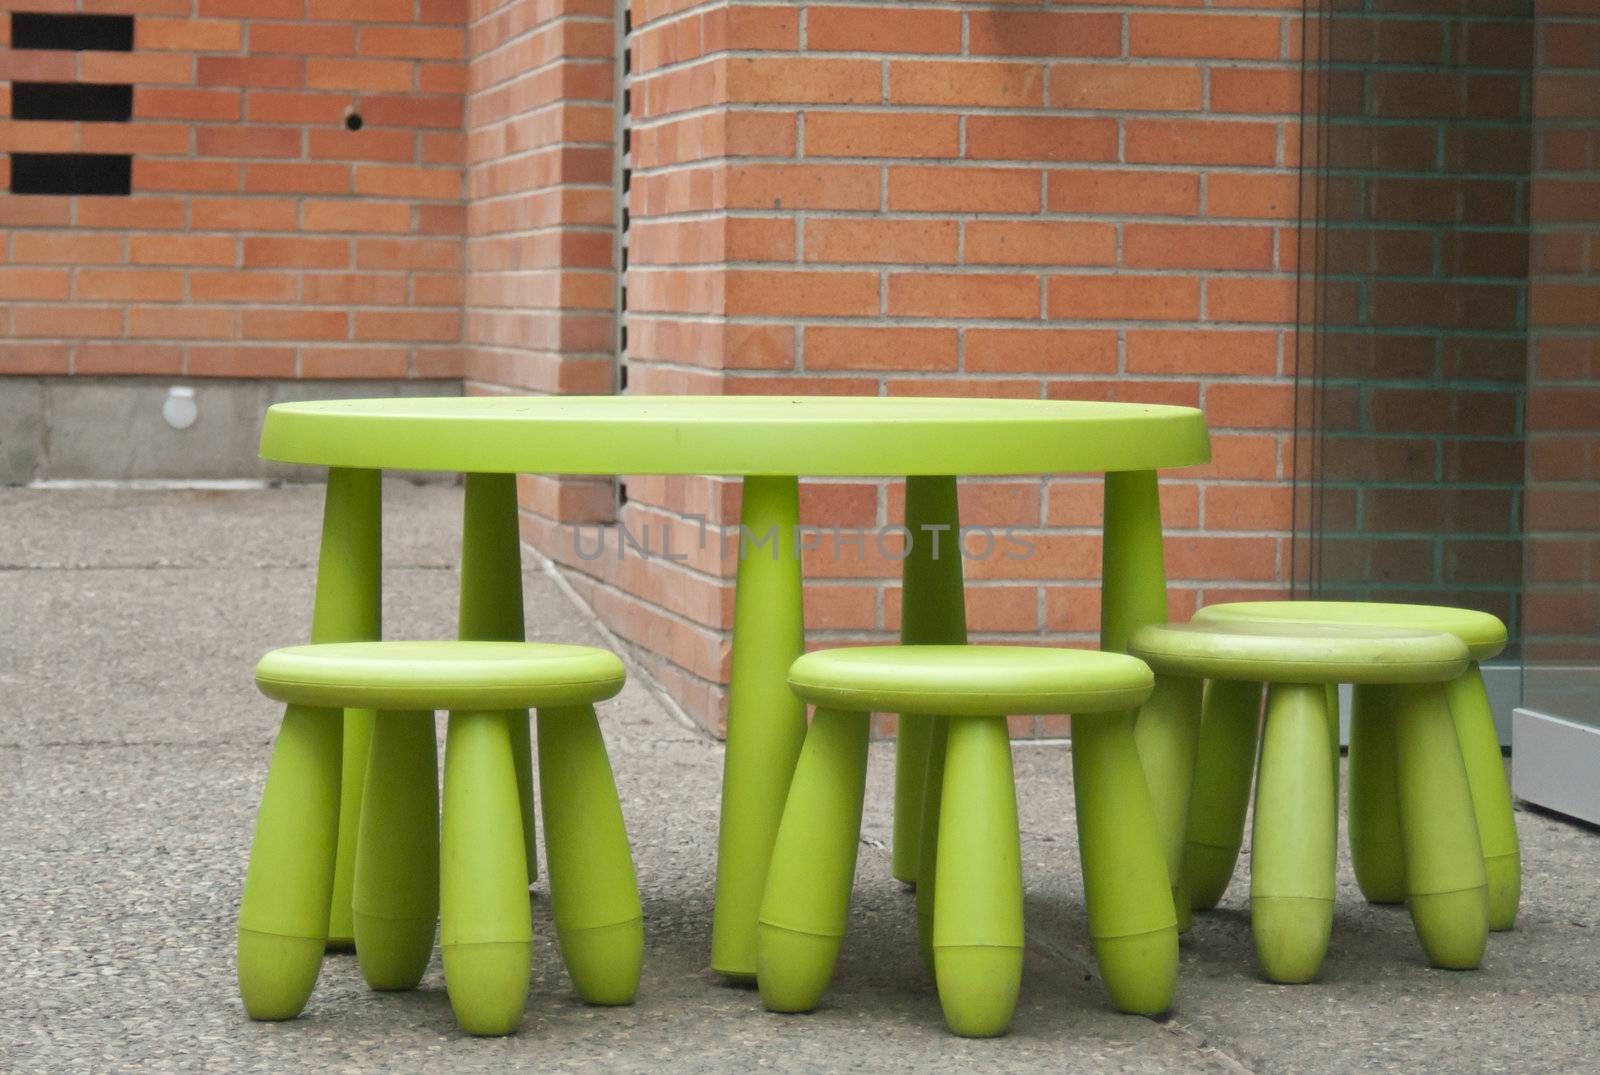 A bright and bold play table for kids in granny apple green.